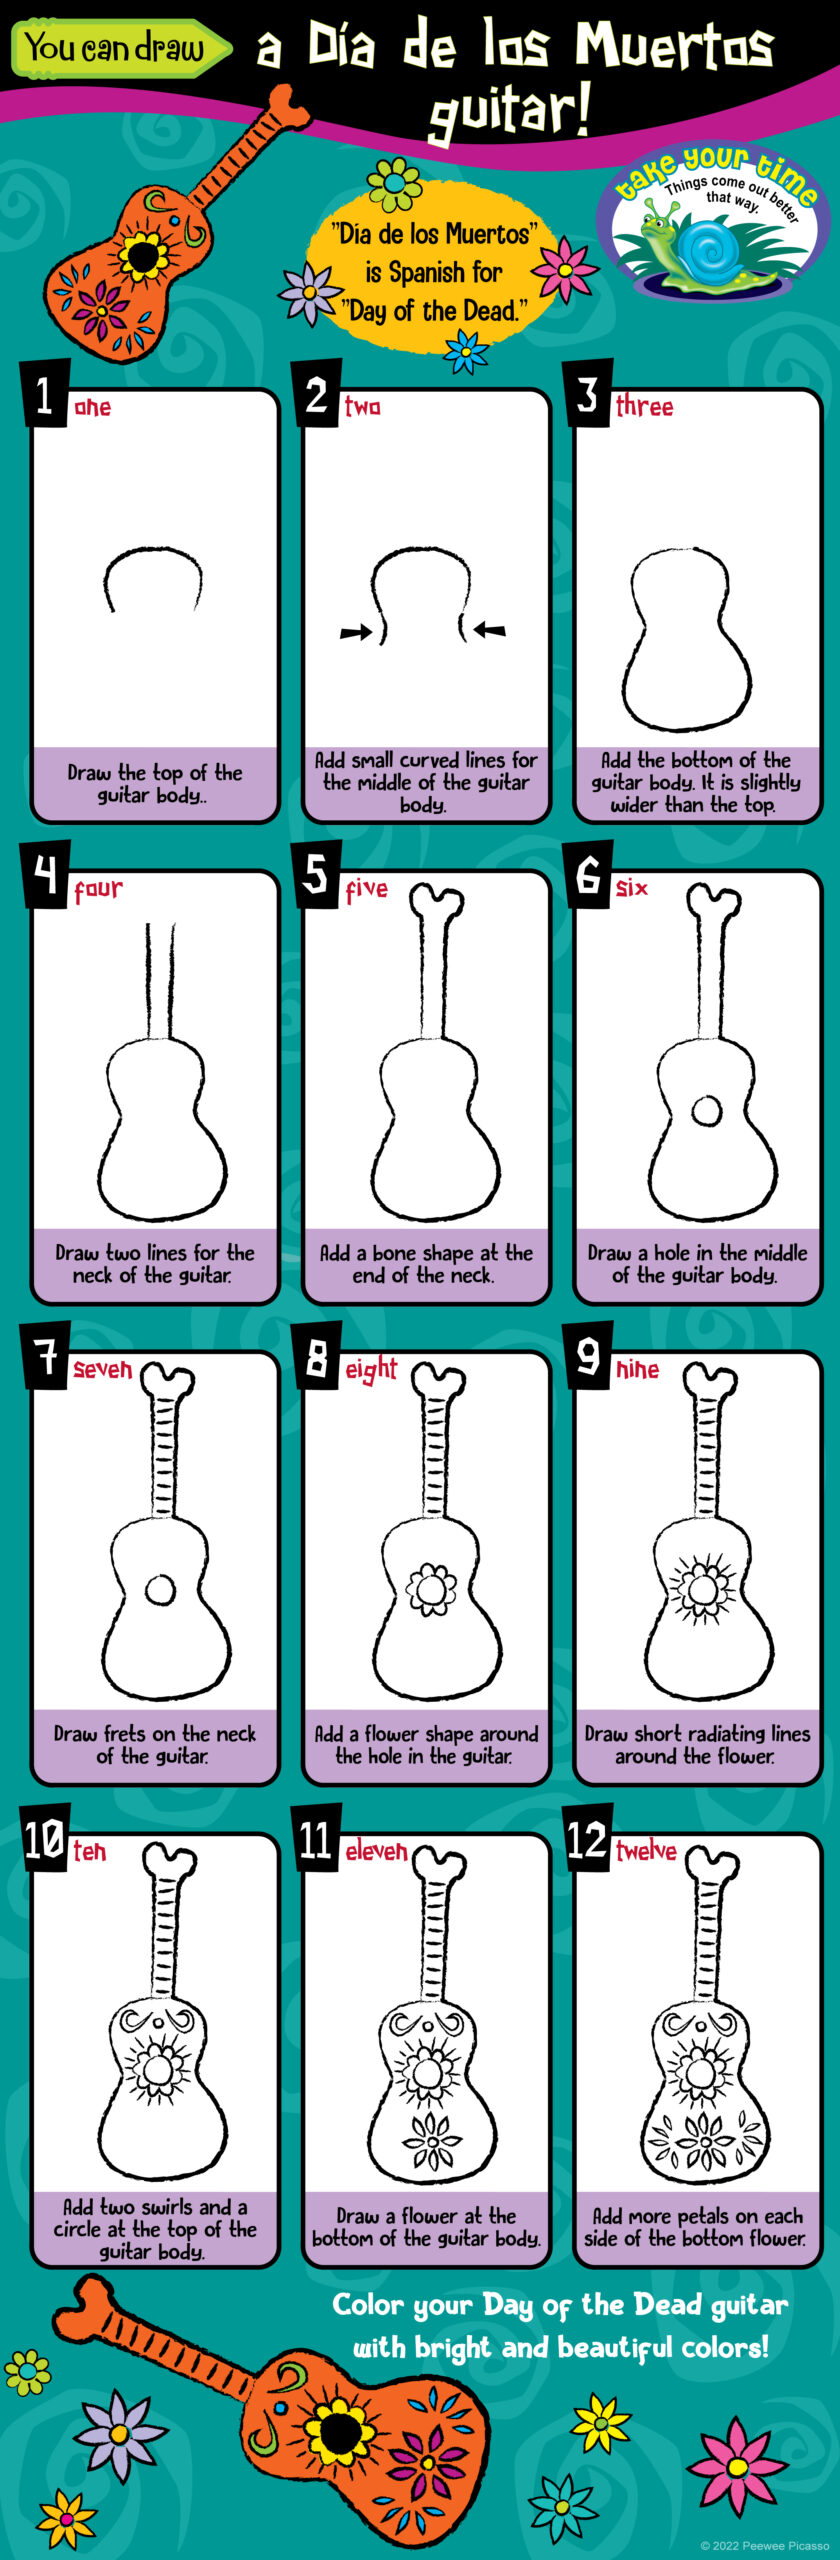 steps to draw a day of the dead guitar